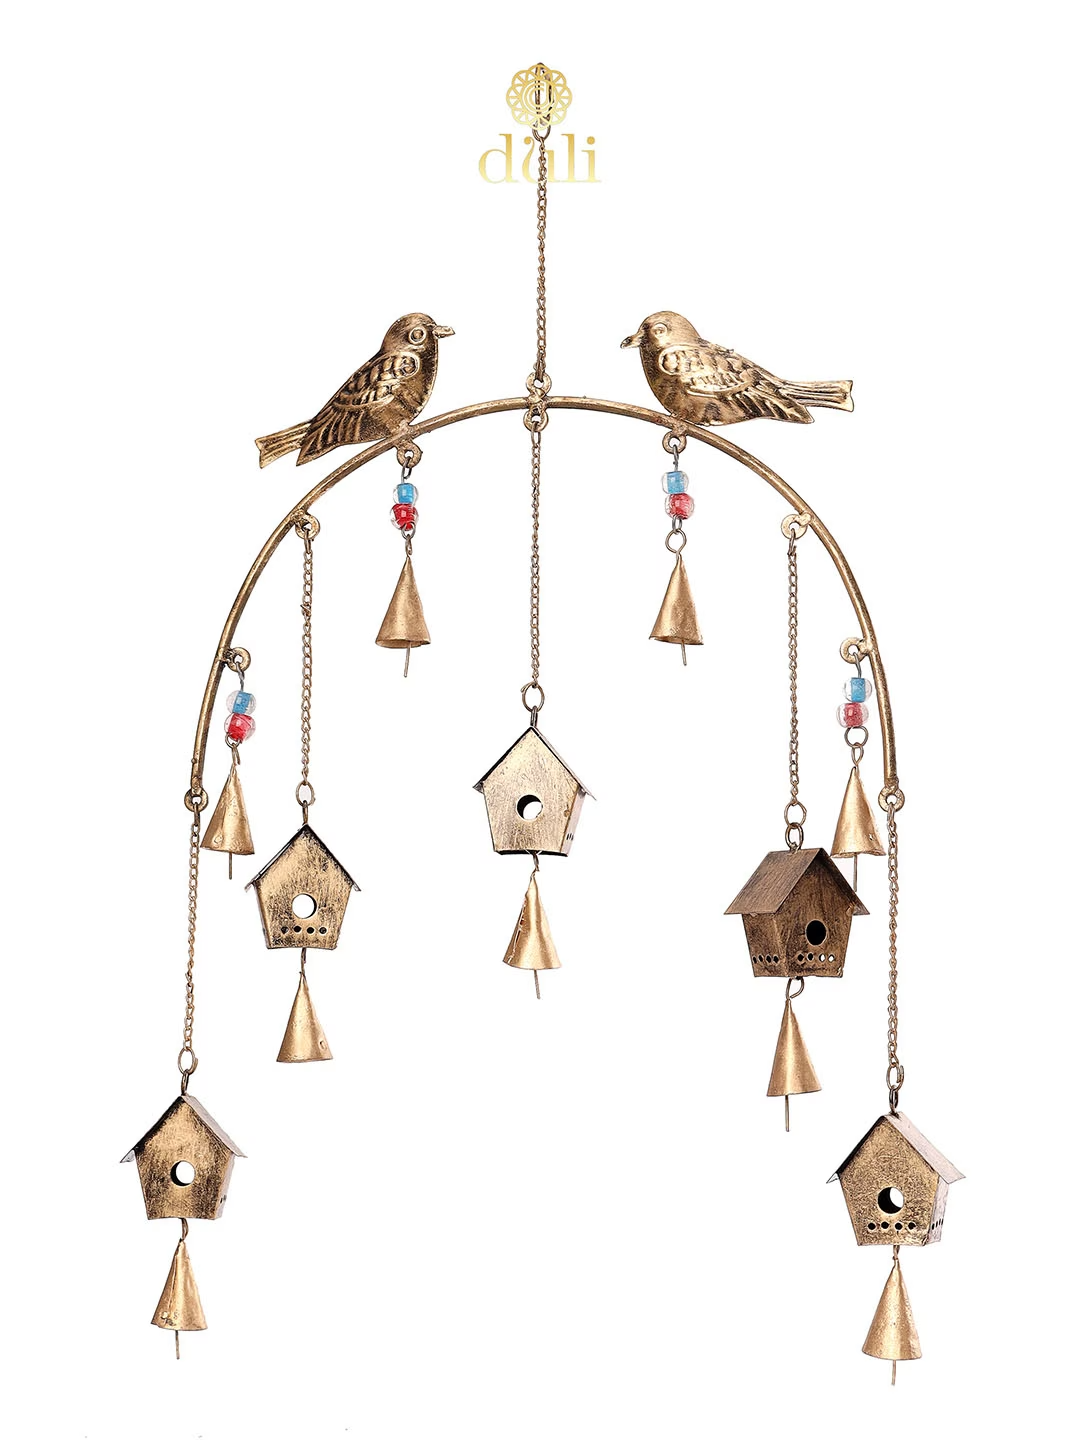 Gold-Toned BirdHouse Design Metal Wall Hanging Windchime with Hanging Bells